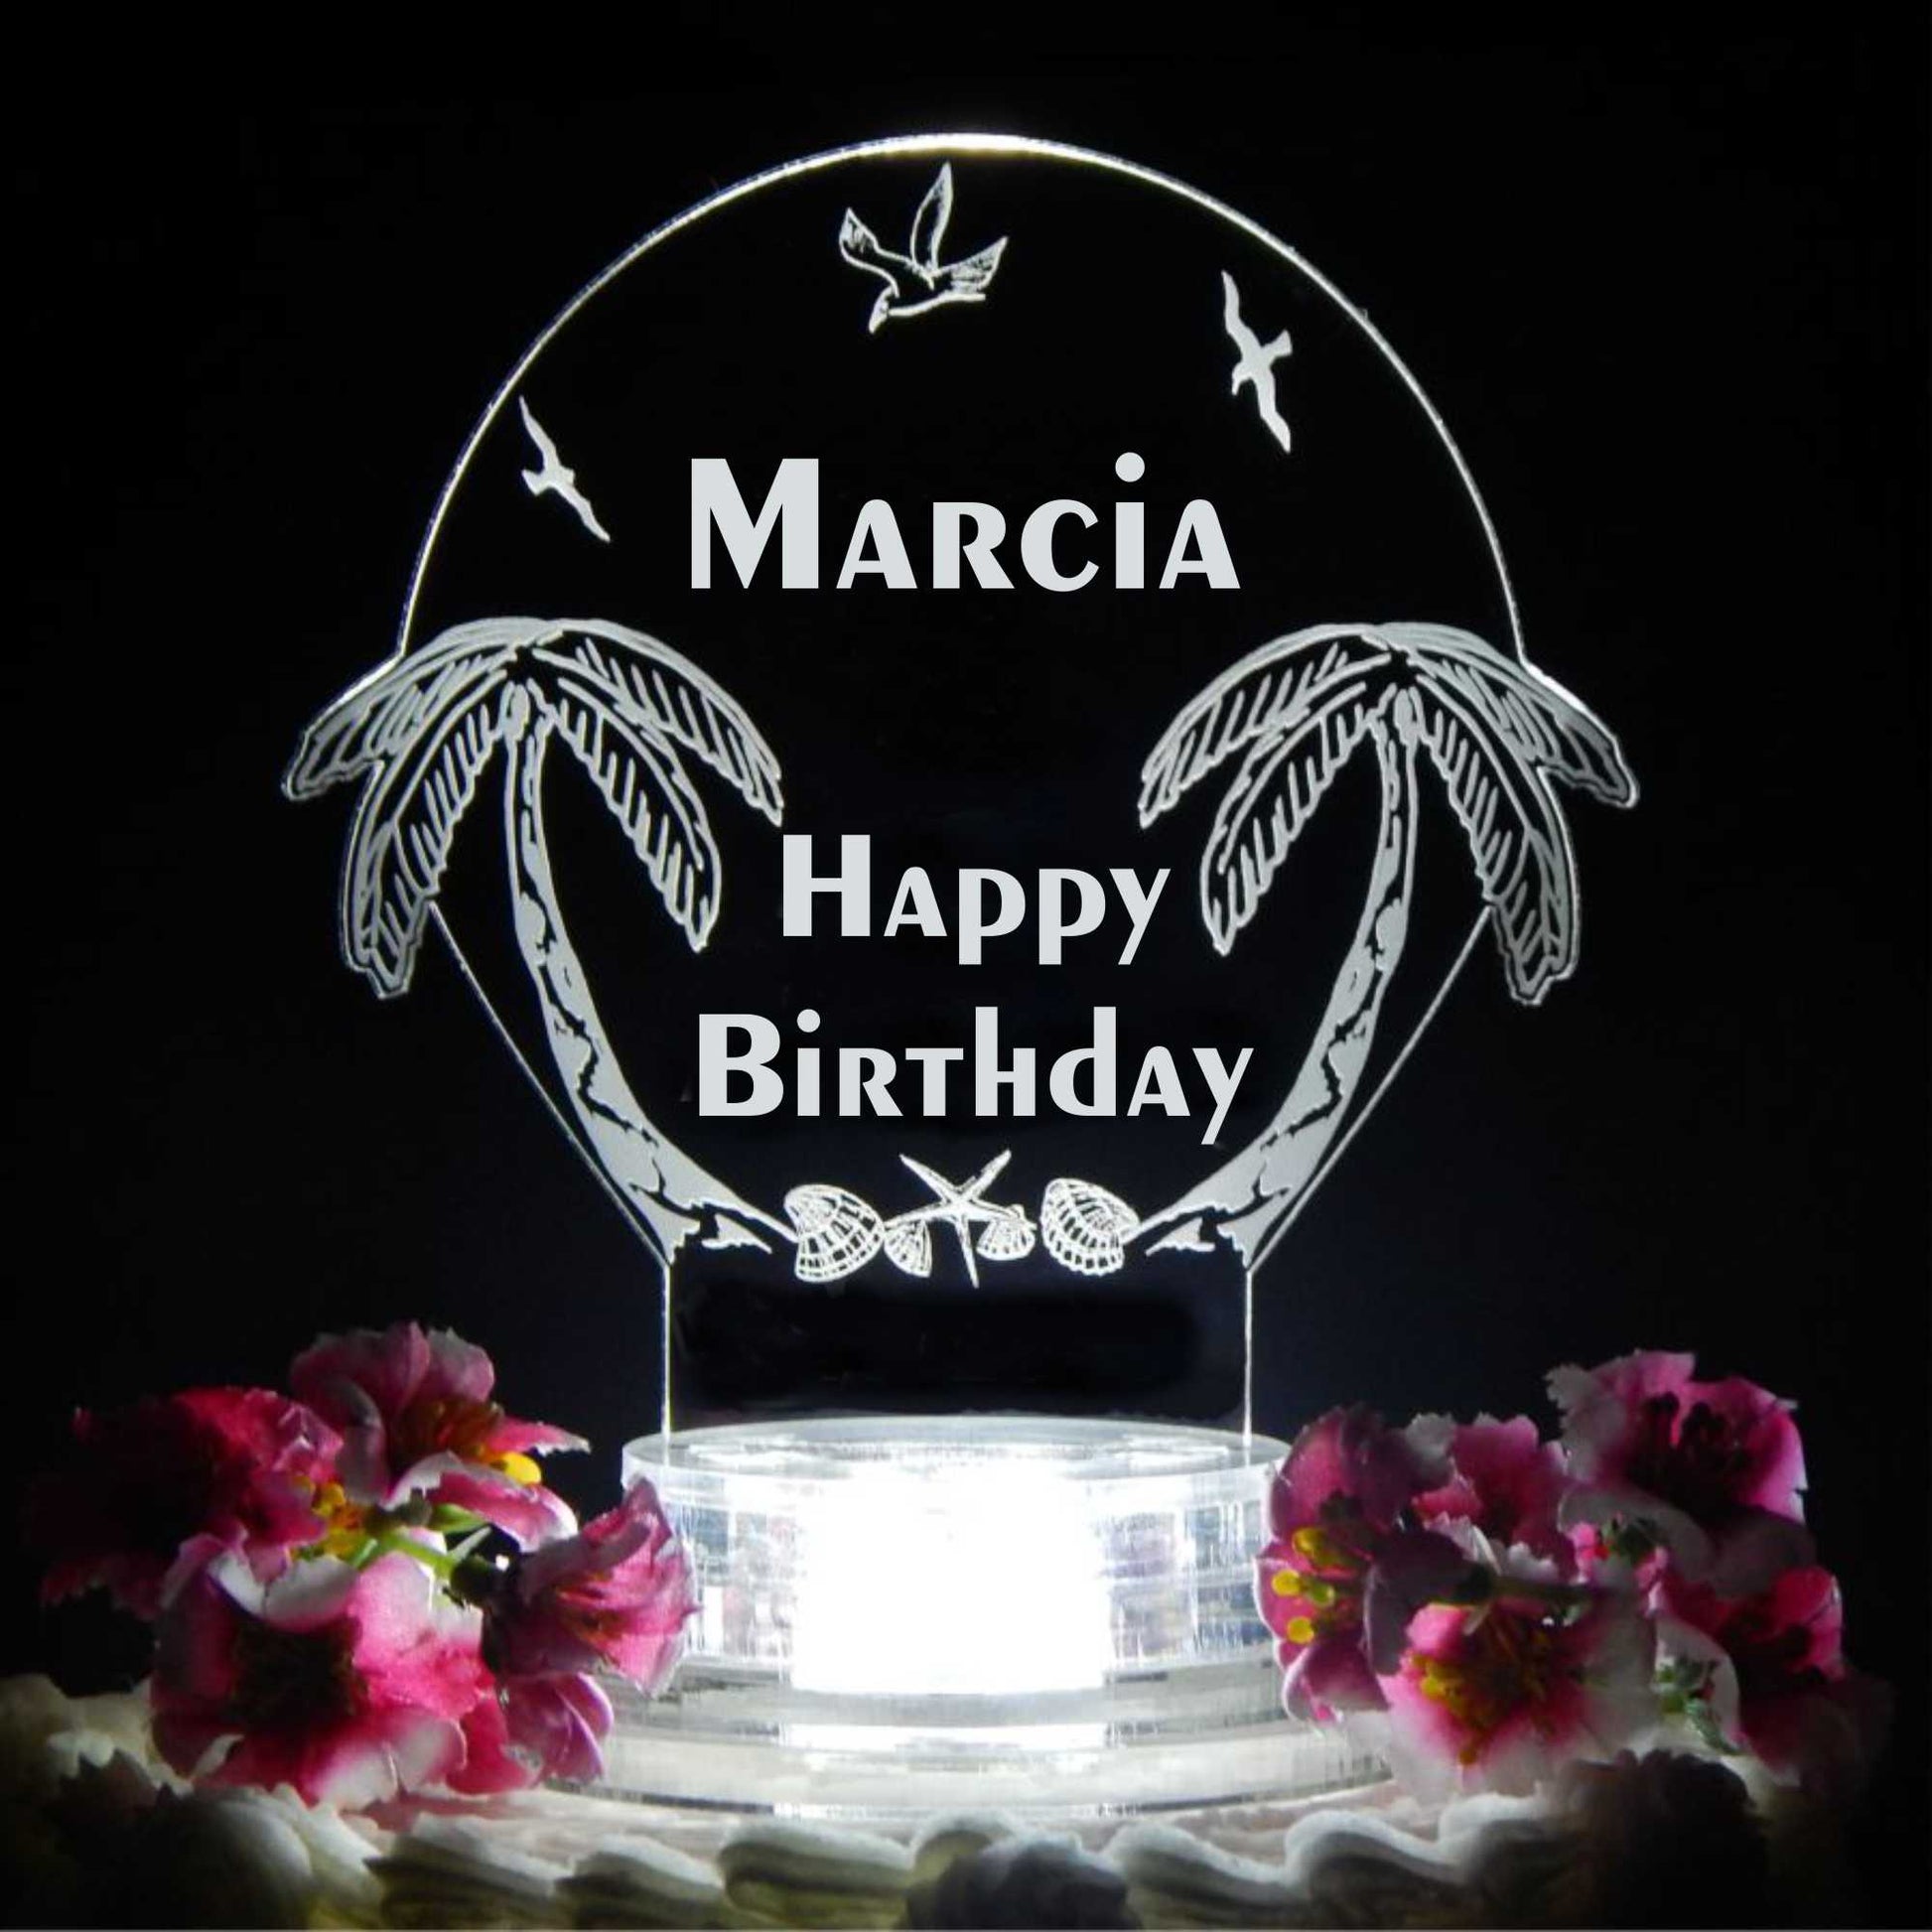 acrylic cake topper designed with palm trees and seagulls, with Happy Birthday and name engraved